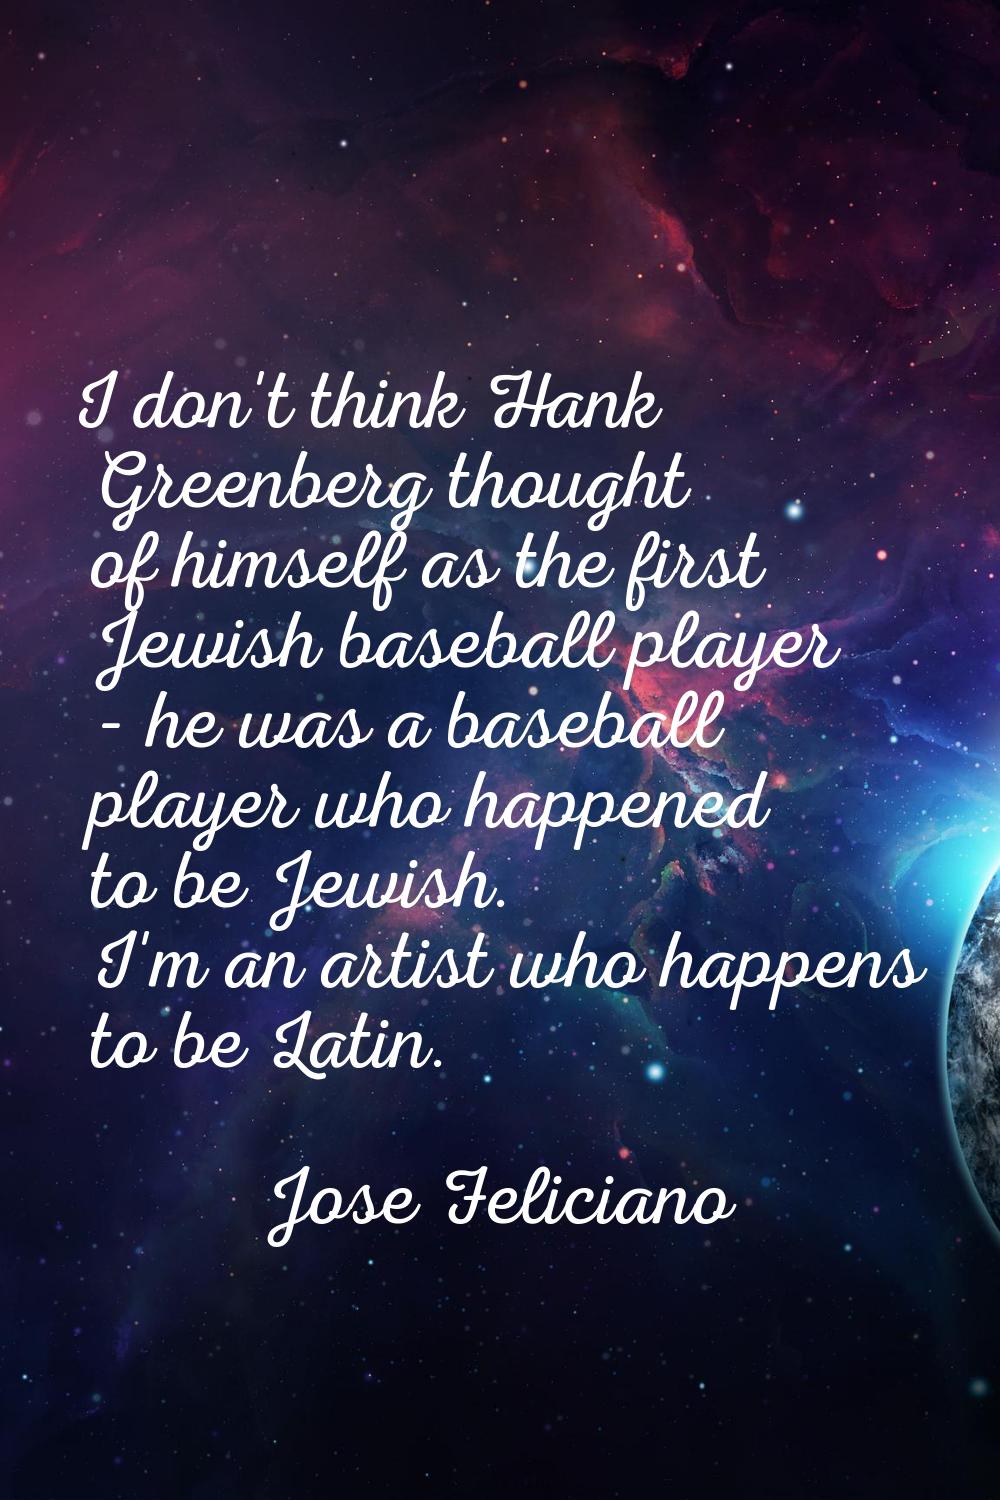 I don't think Hank Greenberg thought of himself as the first Jewish baseball player - he was a base